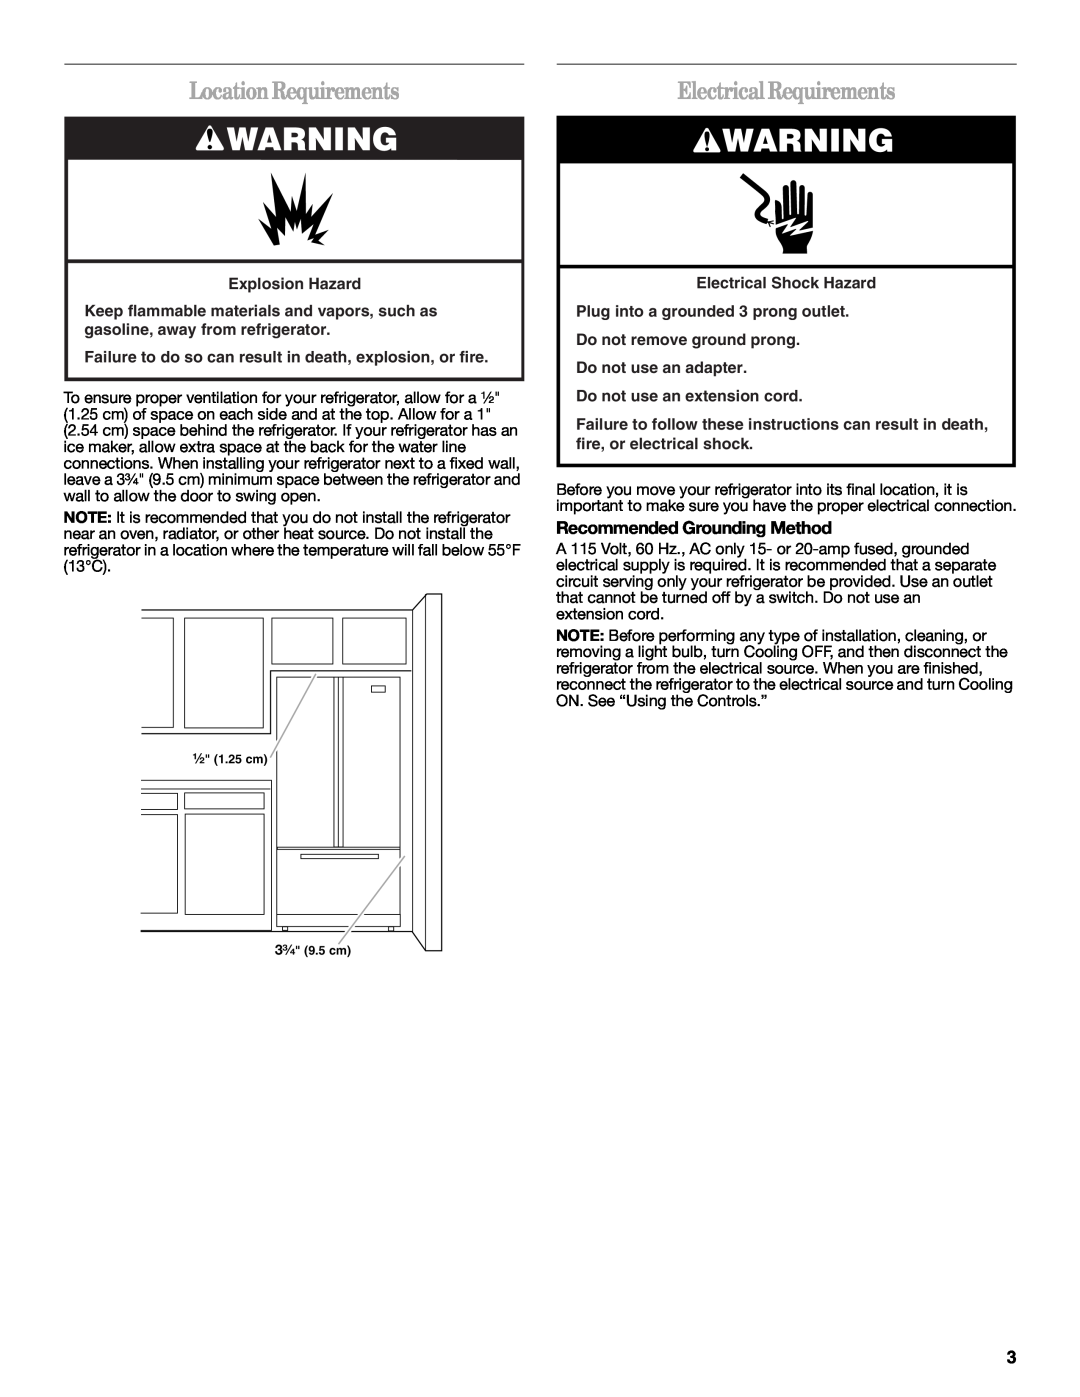 Whirlpool W10314956B LocationRequirements, Electrical Requirements, Recommended Grounding Method, Explosion Hazard 